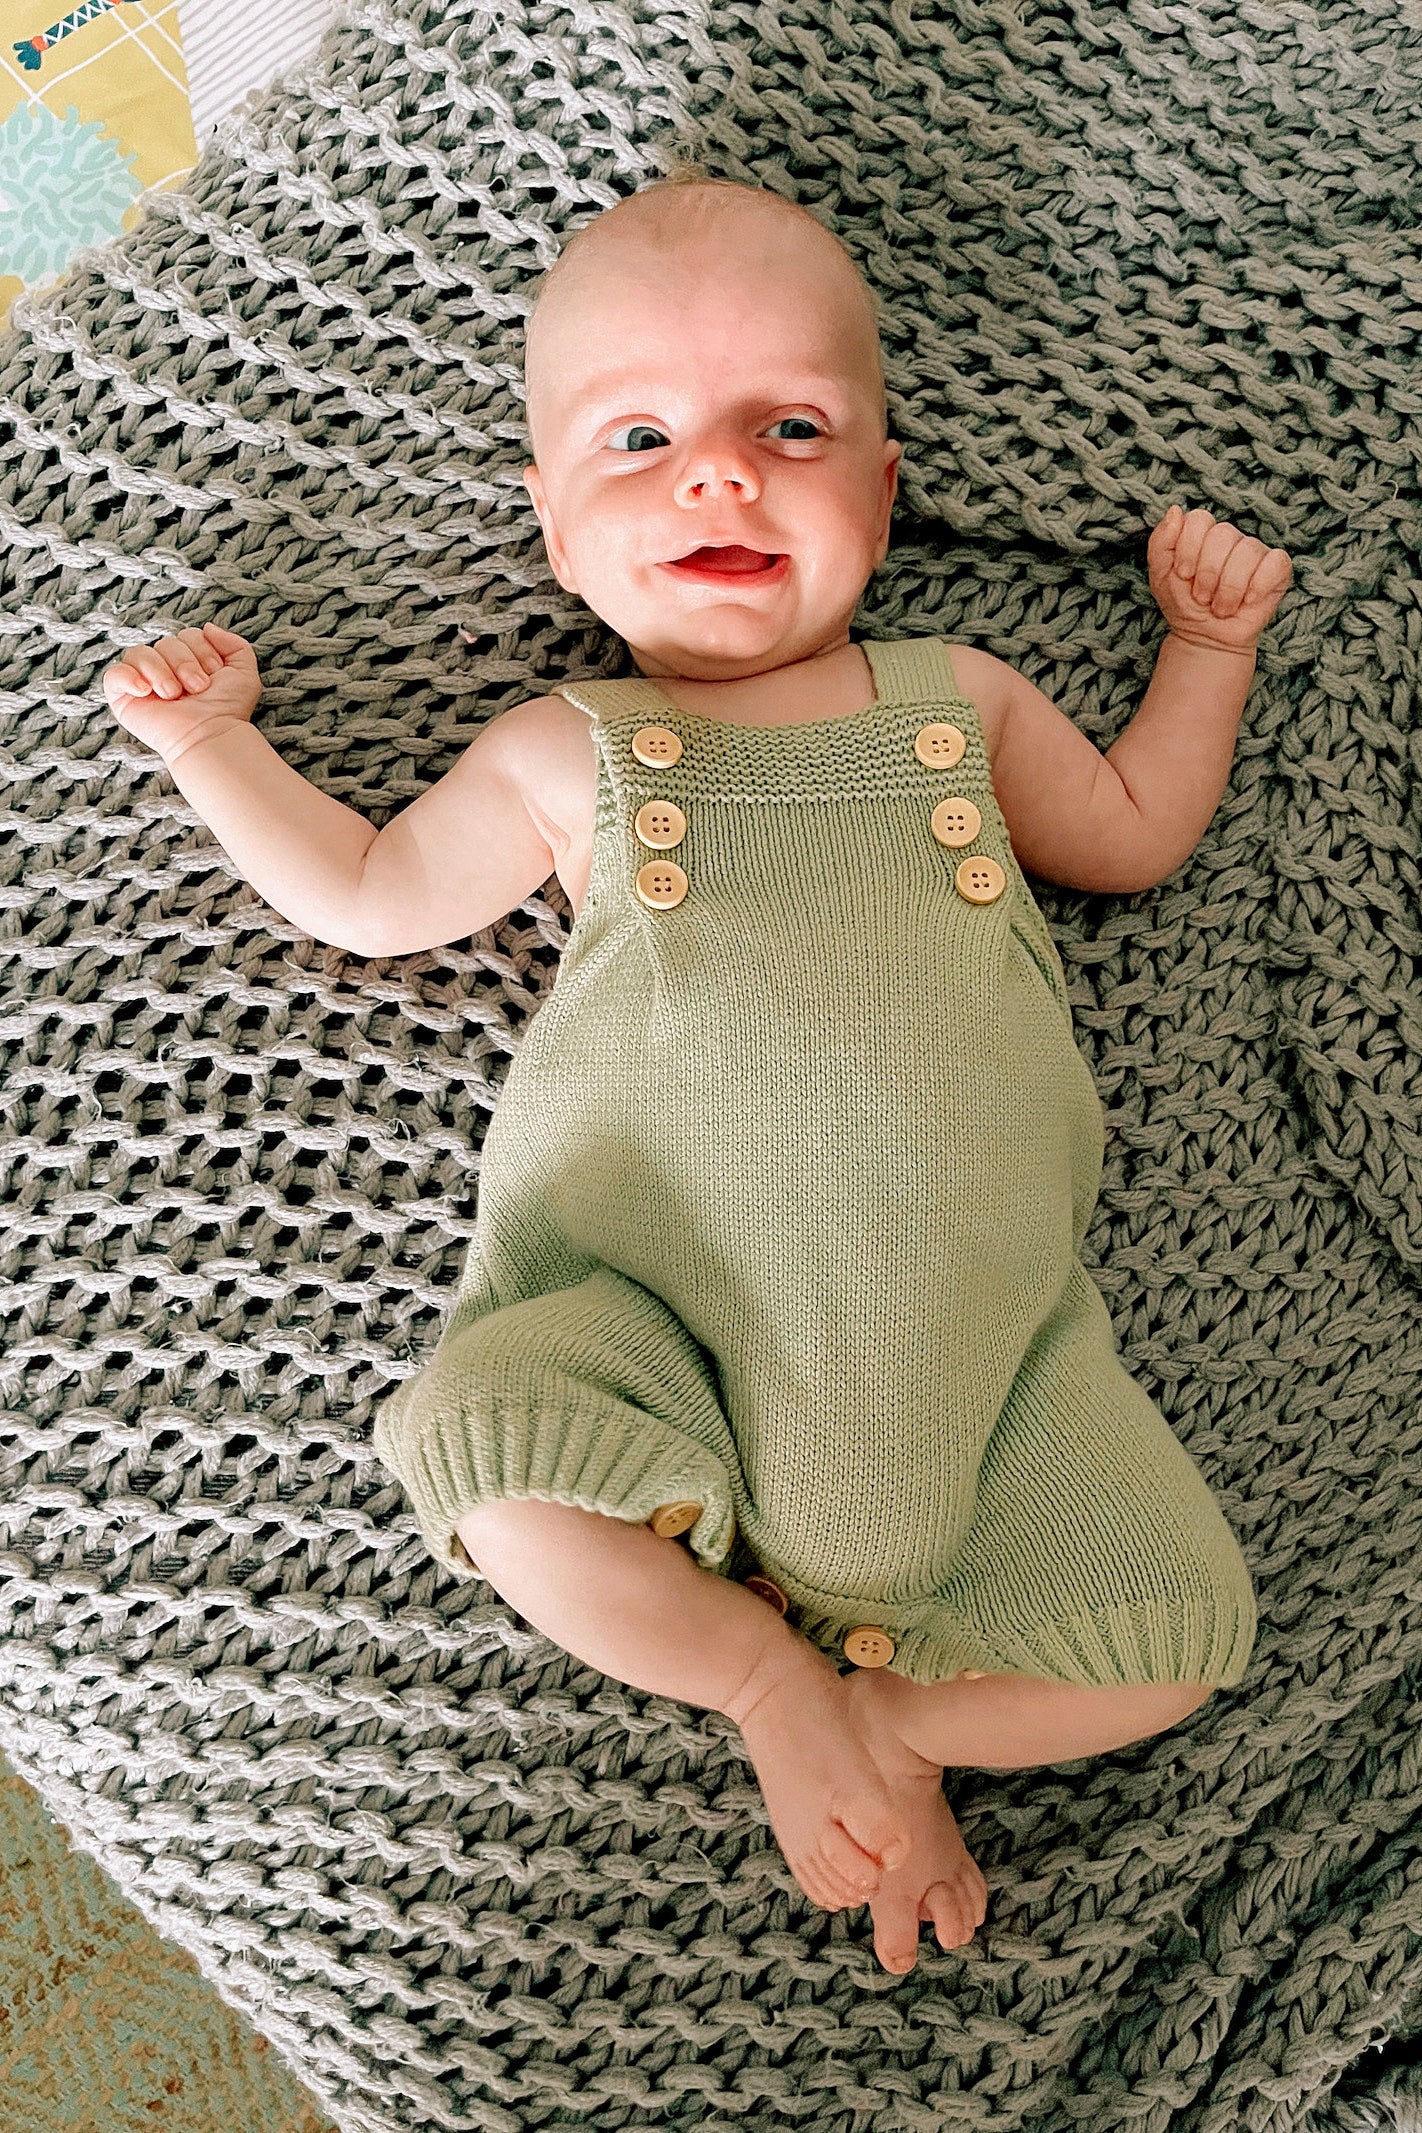 baby knit overalls